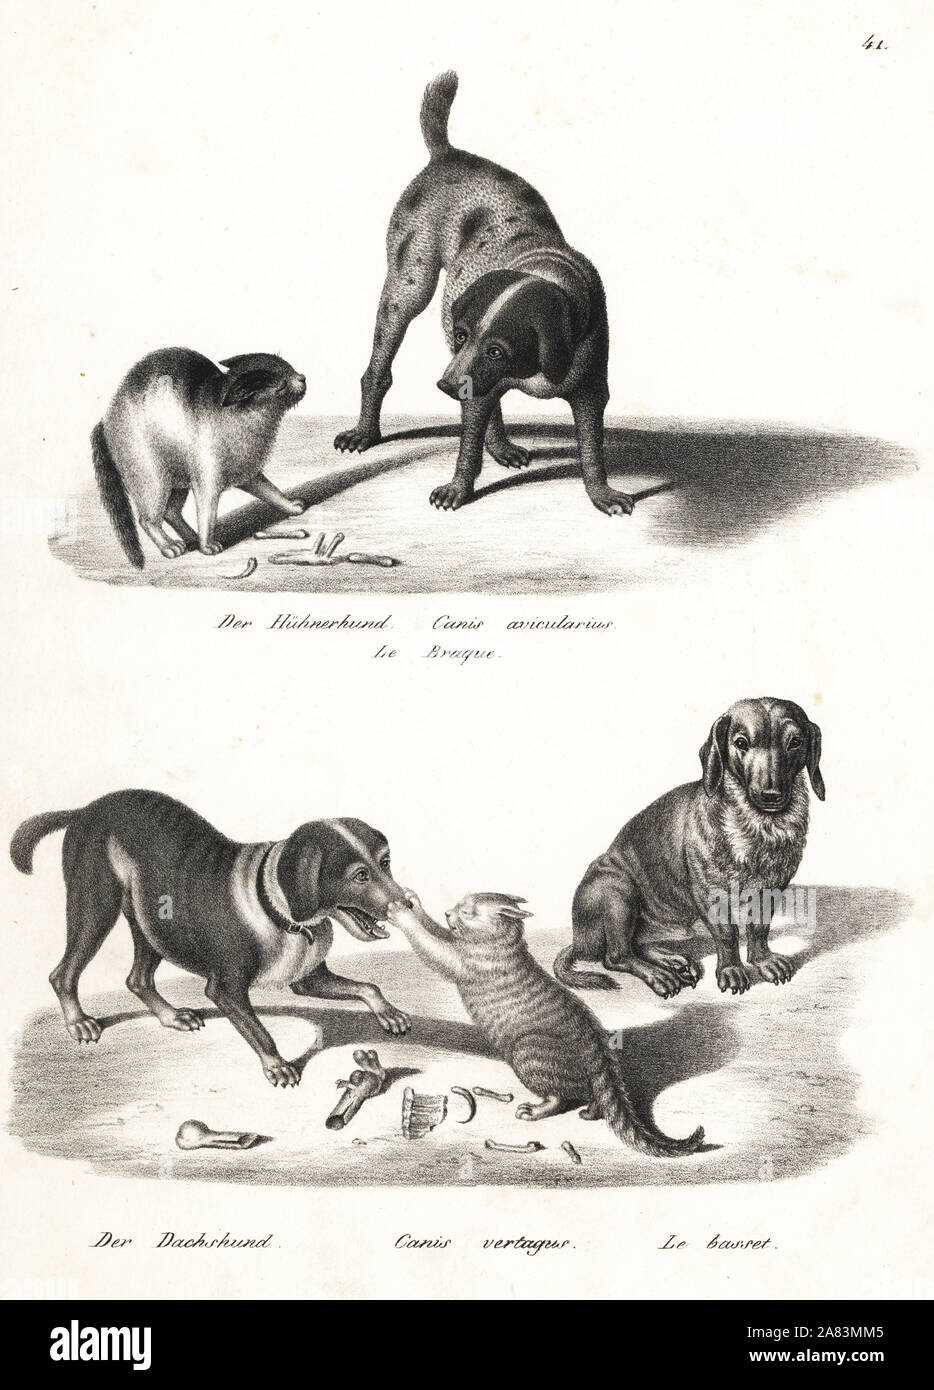 Pointer, Canis avicularius, dachshund, Canis vertagus, and basset hound, all breeds of Canis lupus familiaris. Lithograph by Karl Joseph Brodtmann from Heinrich Rudolf Schinz's Illustrated Natural History of Men and Animals, 1836. Stock Photo